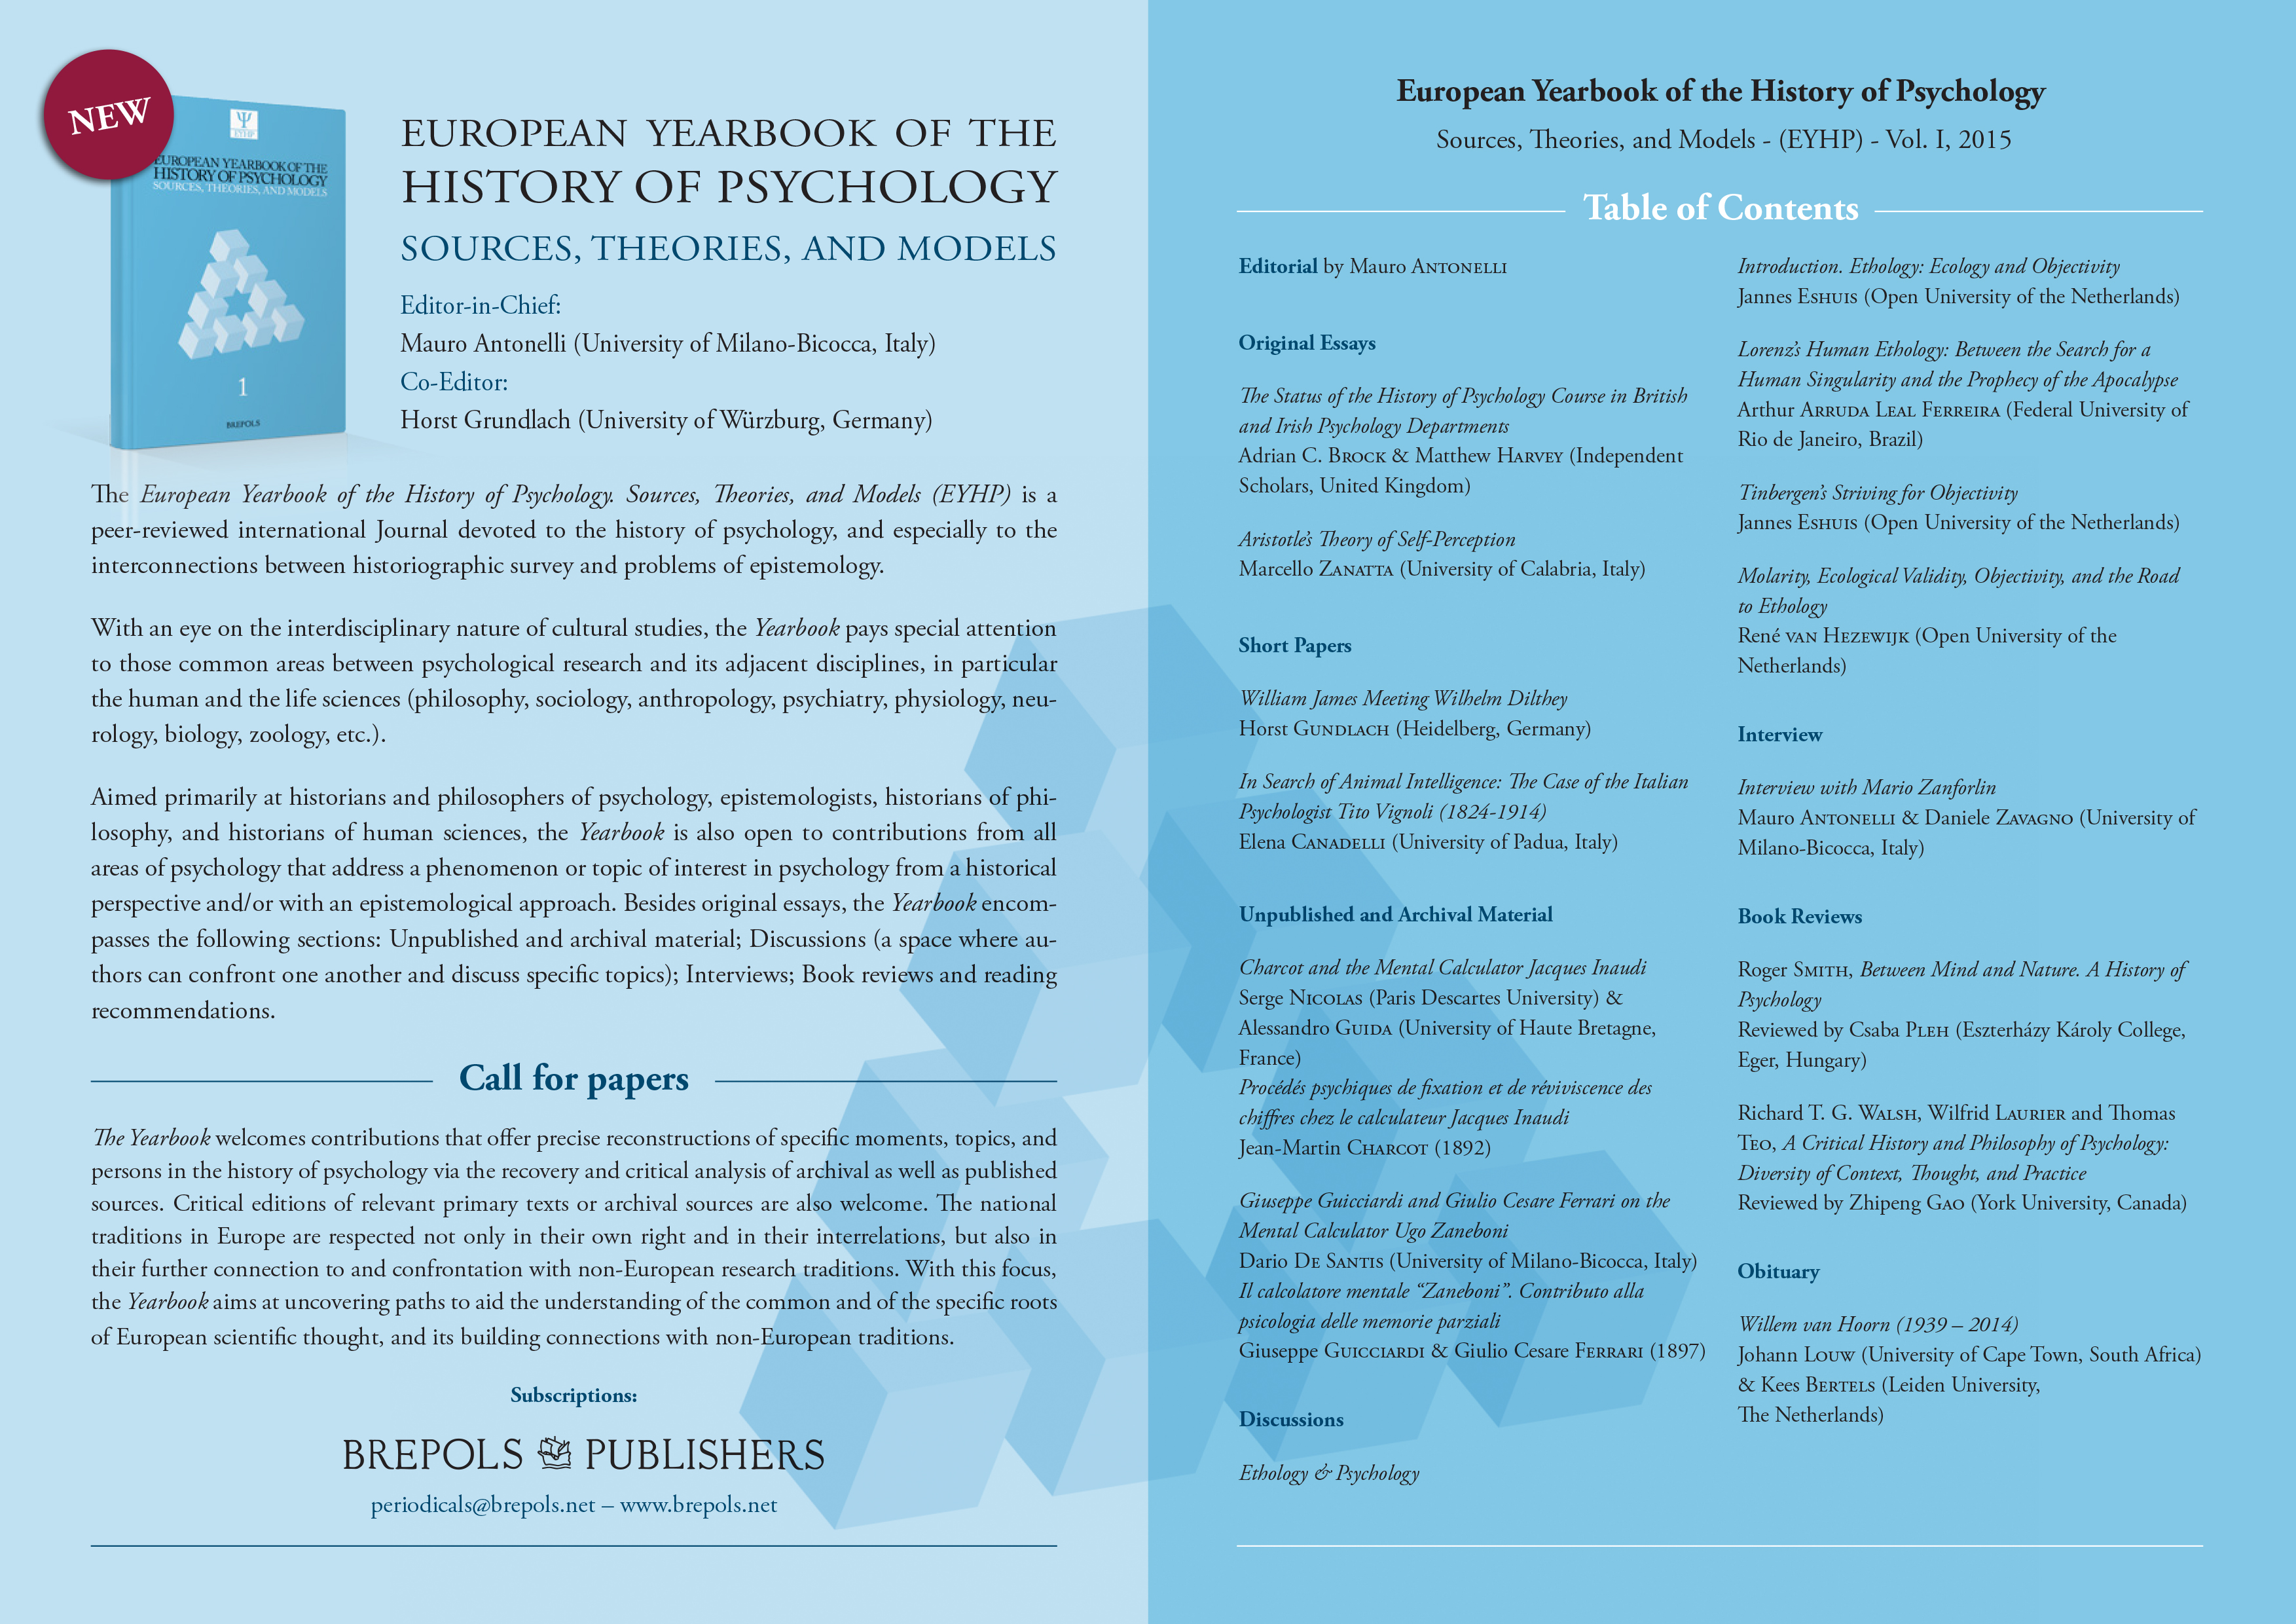 European Yearbook of the History of Psychology. Sources, Theories, and Models (EYHP)